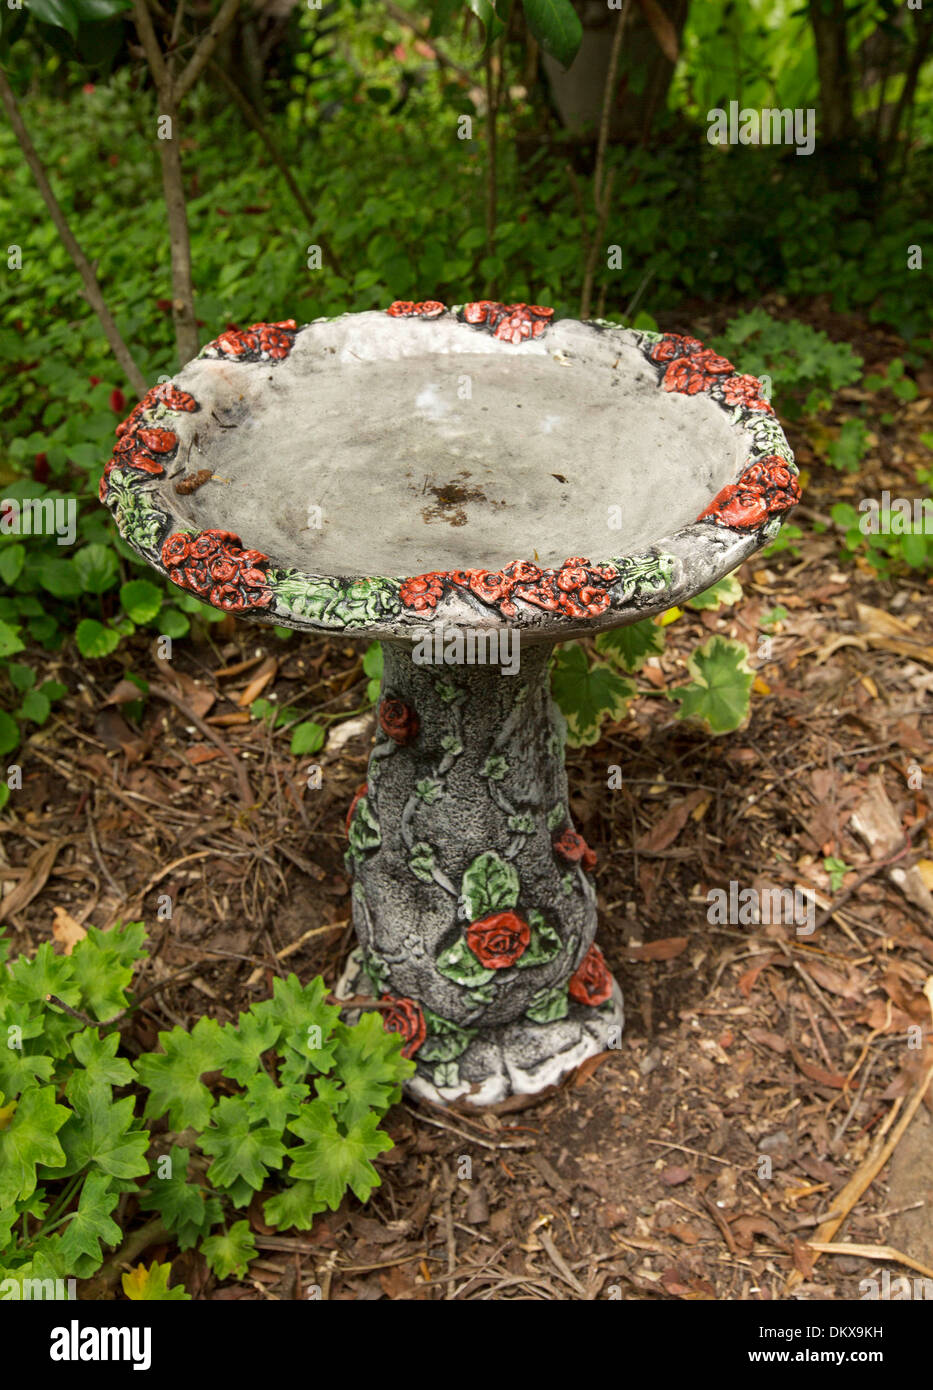 Ornate concrete bird bath with decoration of red roses and green leaves - an attractive feature to attract birds to the garden Stock Photo